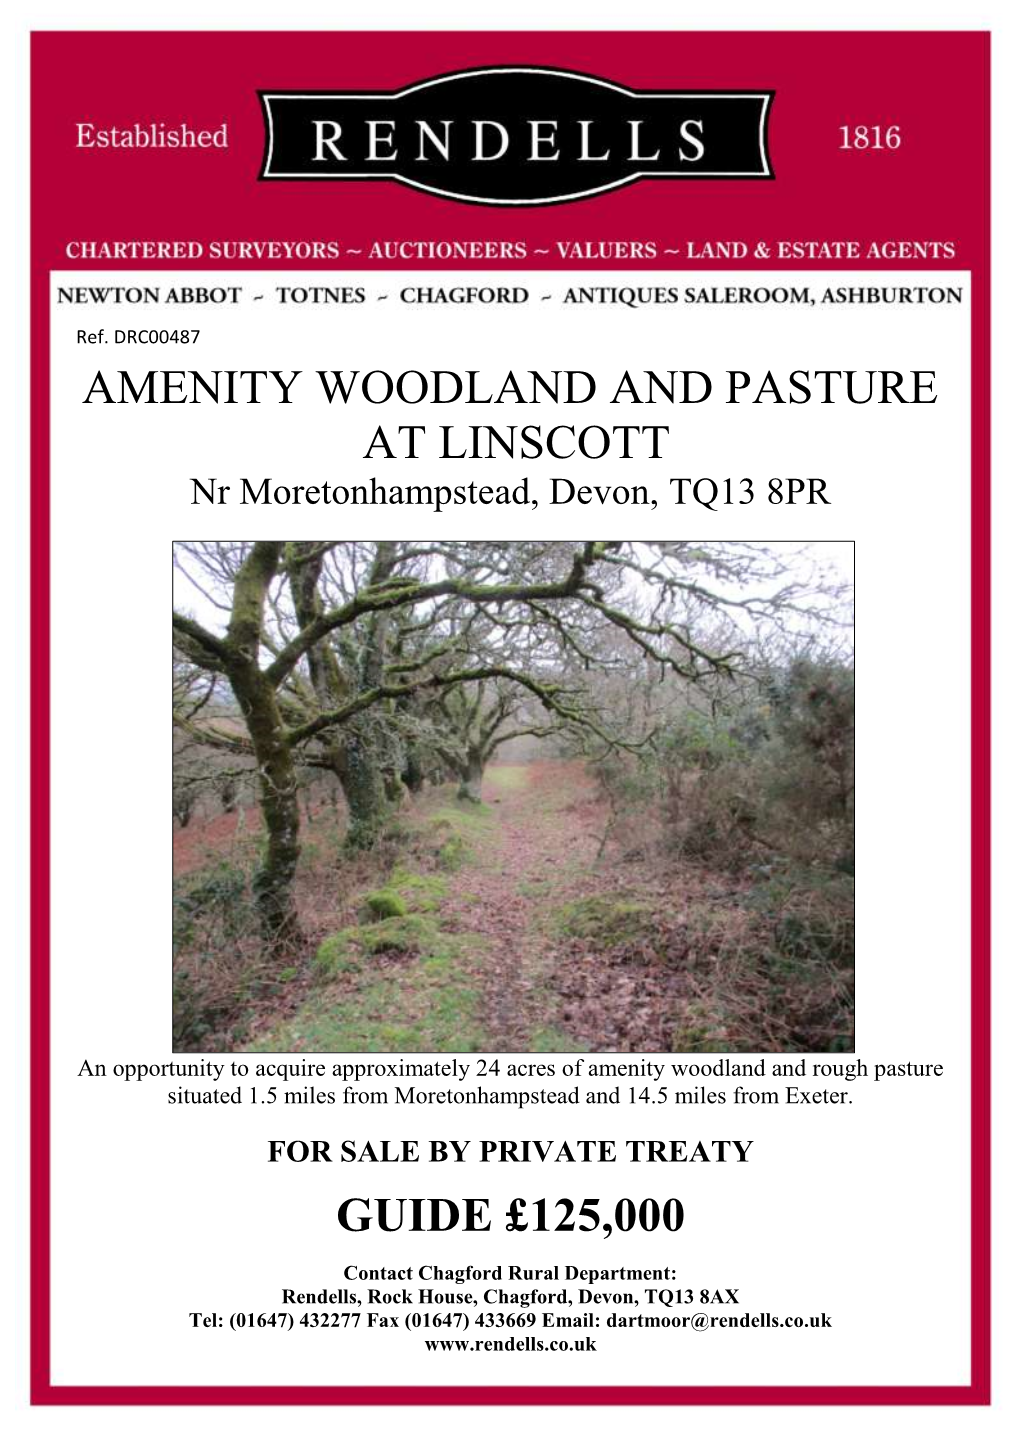 Amenity Woodland and Pasture at Linscott Guide £125,000